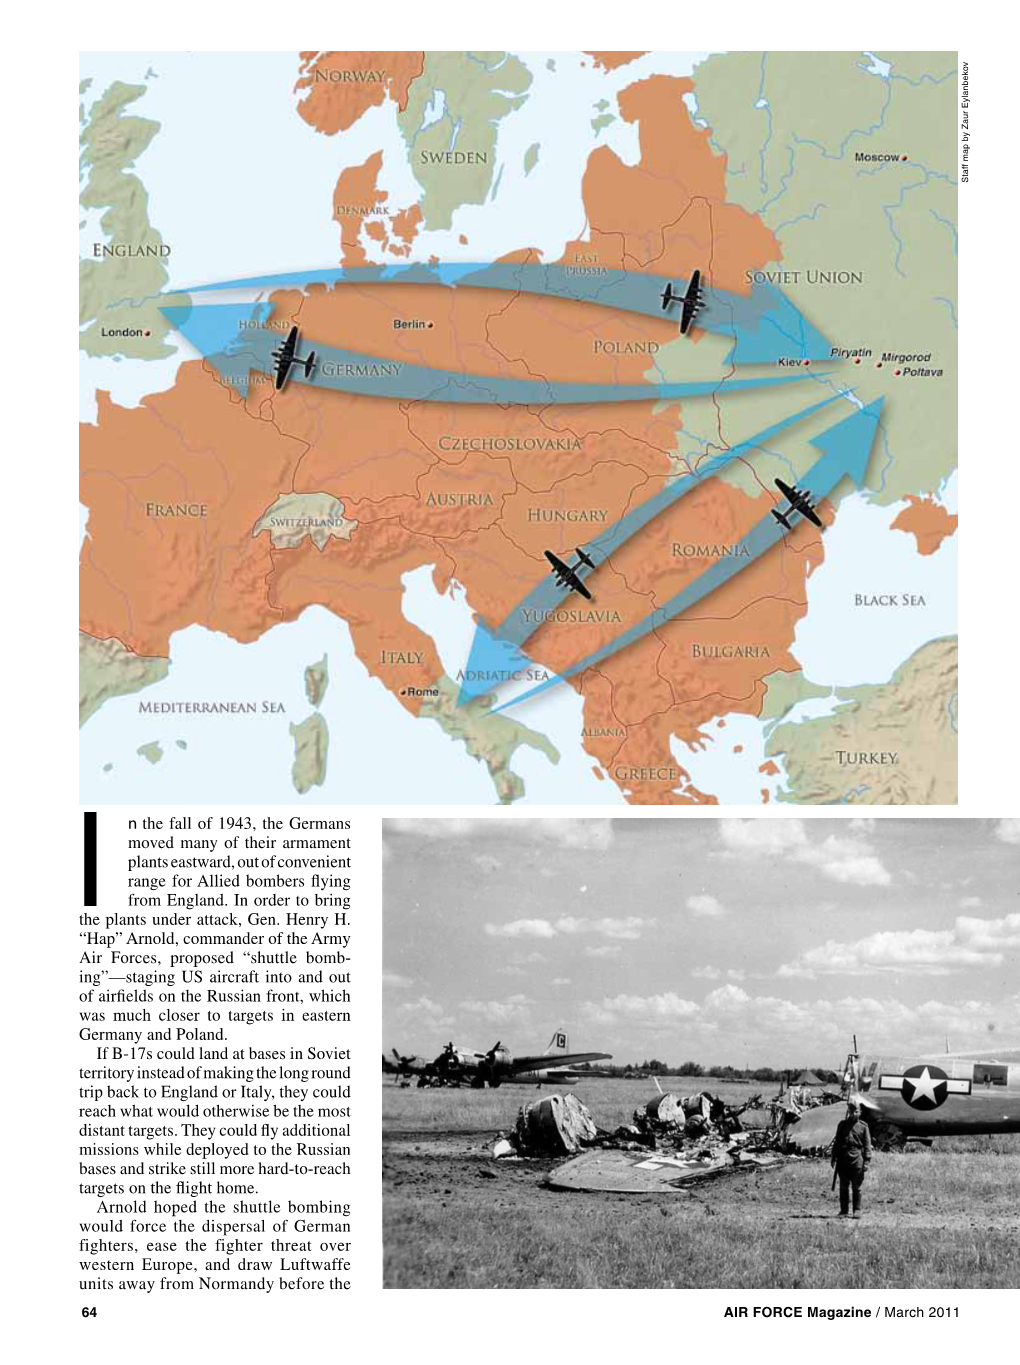 N the Fall of 1943, the Germans Moved Many of Their Armament Plants Eastward, out of Convenient Range for Allied Bombers Flying from England